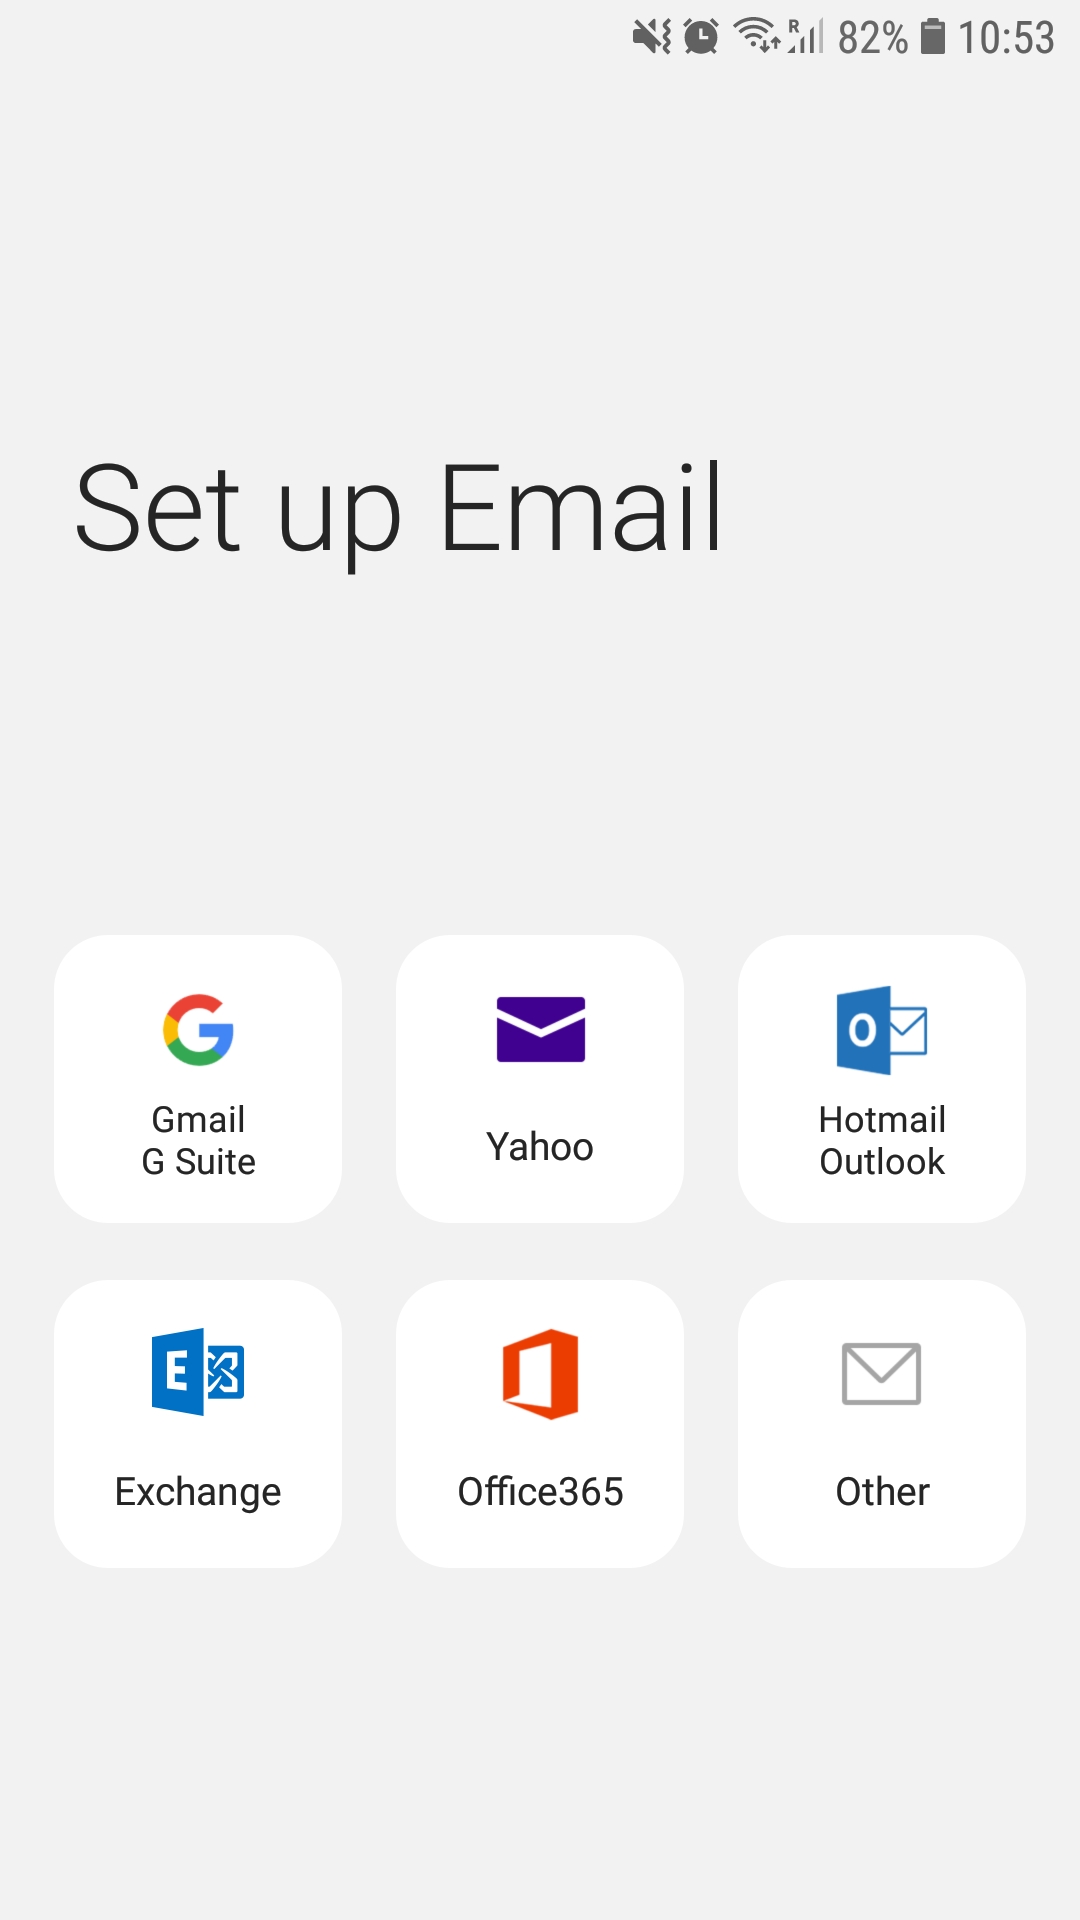 Support article: Setting up mail on an Android phone - Simply.com